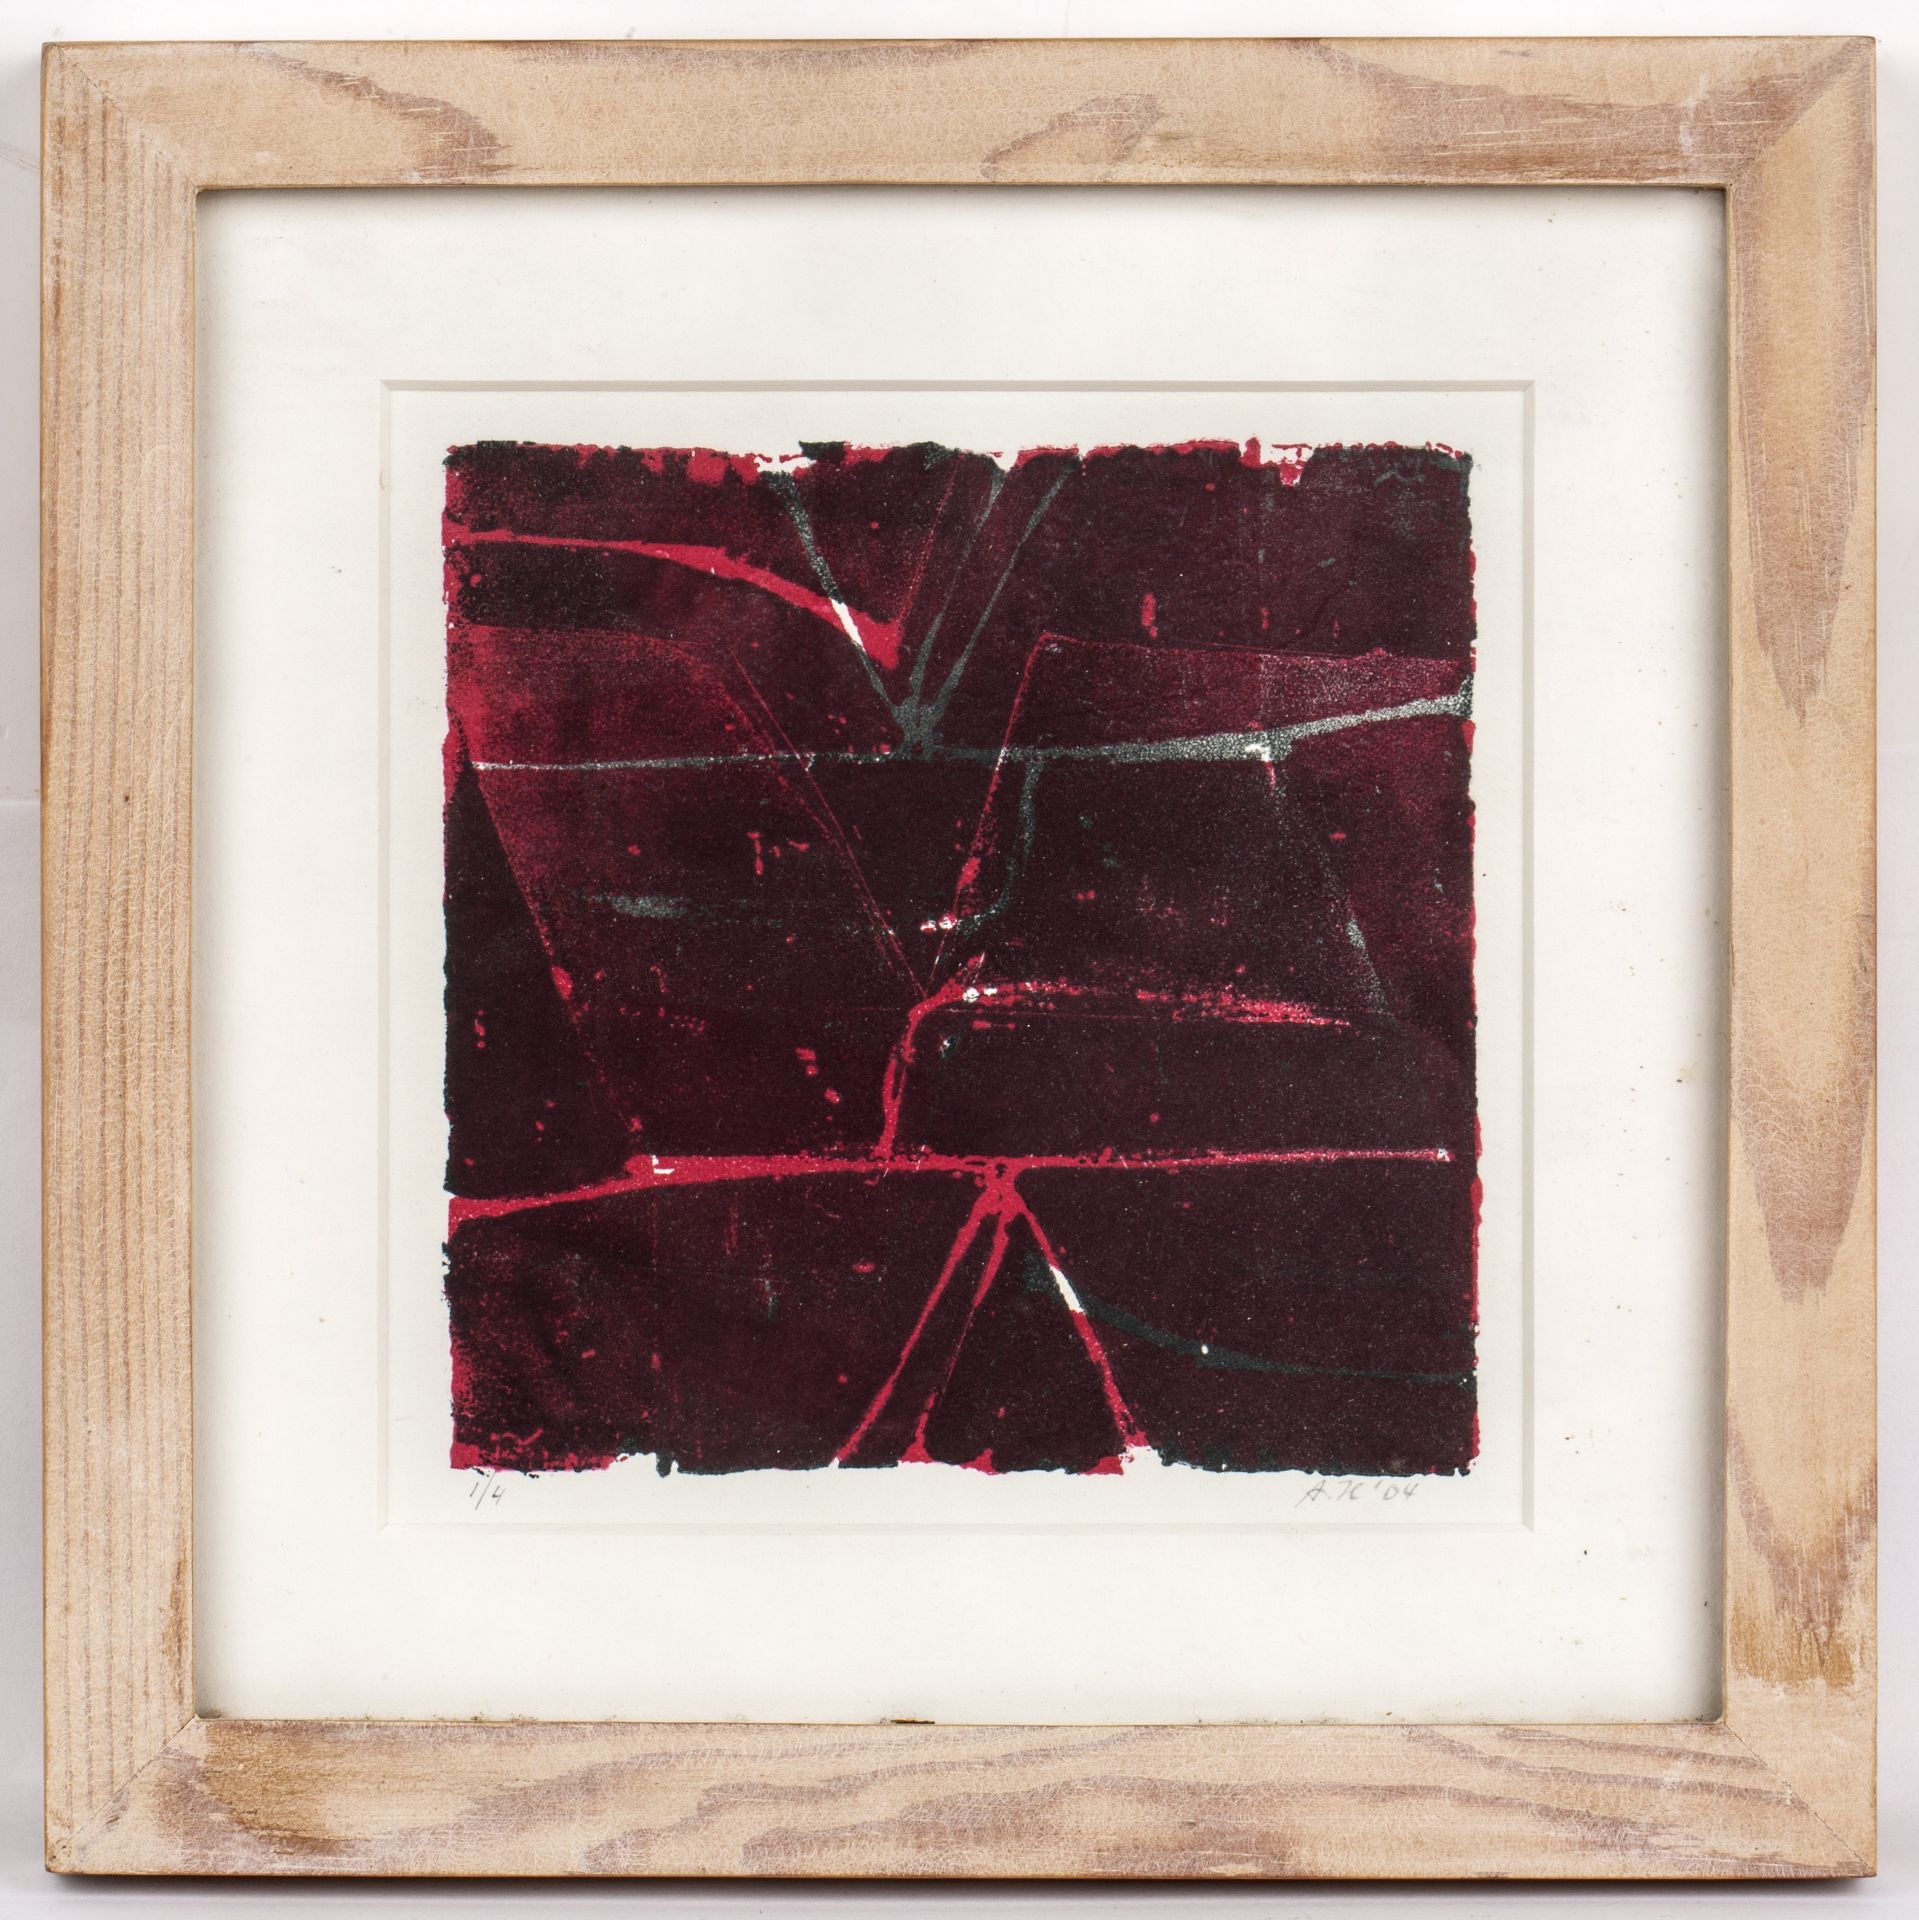 Annette H**** (Contemporary) 'Red abstract', monoprint, signed and dated 2004 in pencil lower right, - Image 5 of 6